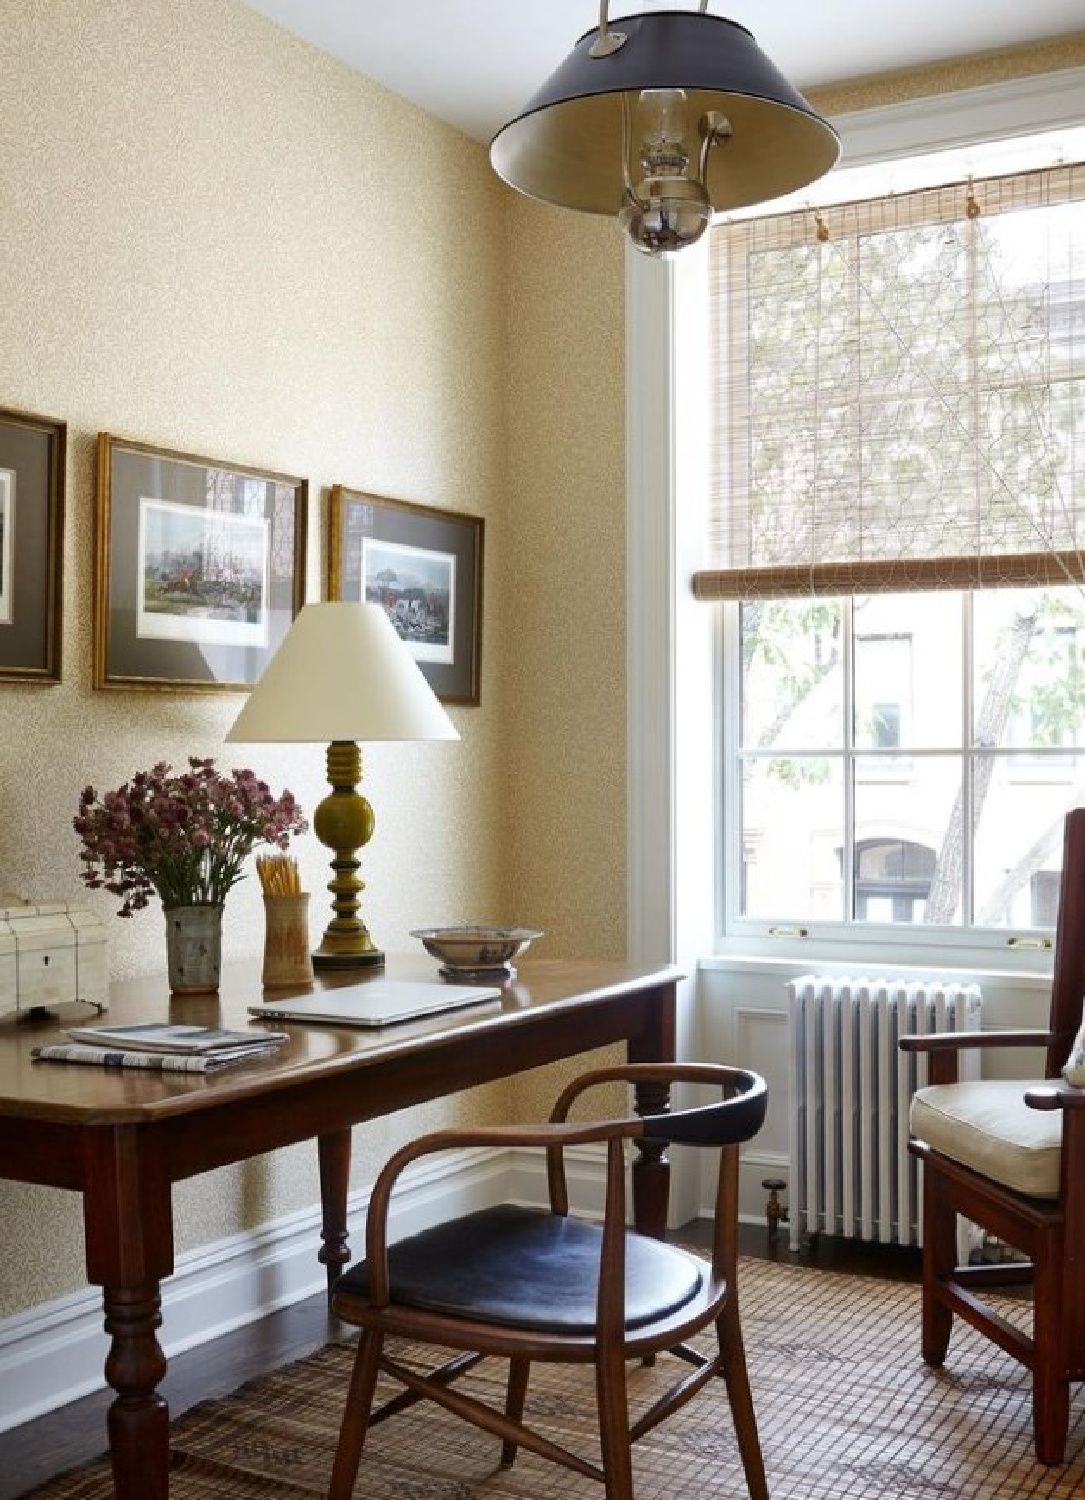 Traditional style home office with antique desk and chair - @mcgrath2. #homeoffice